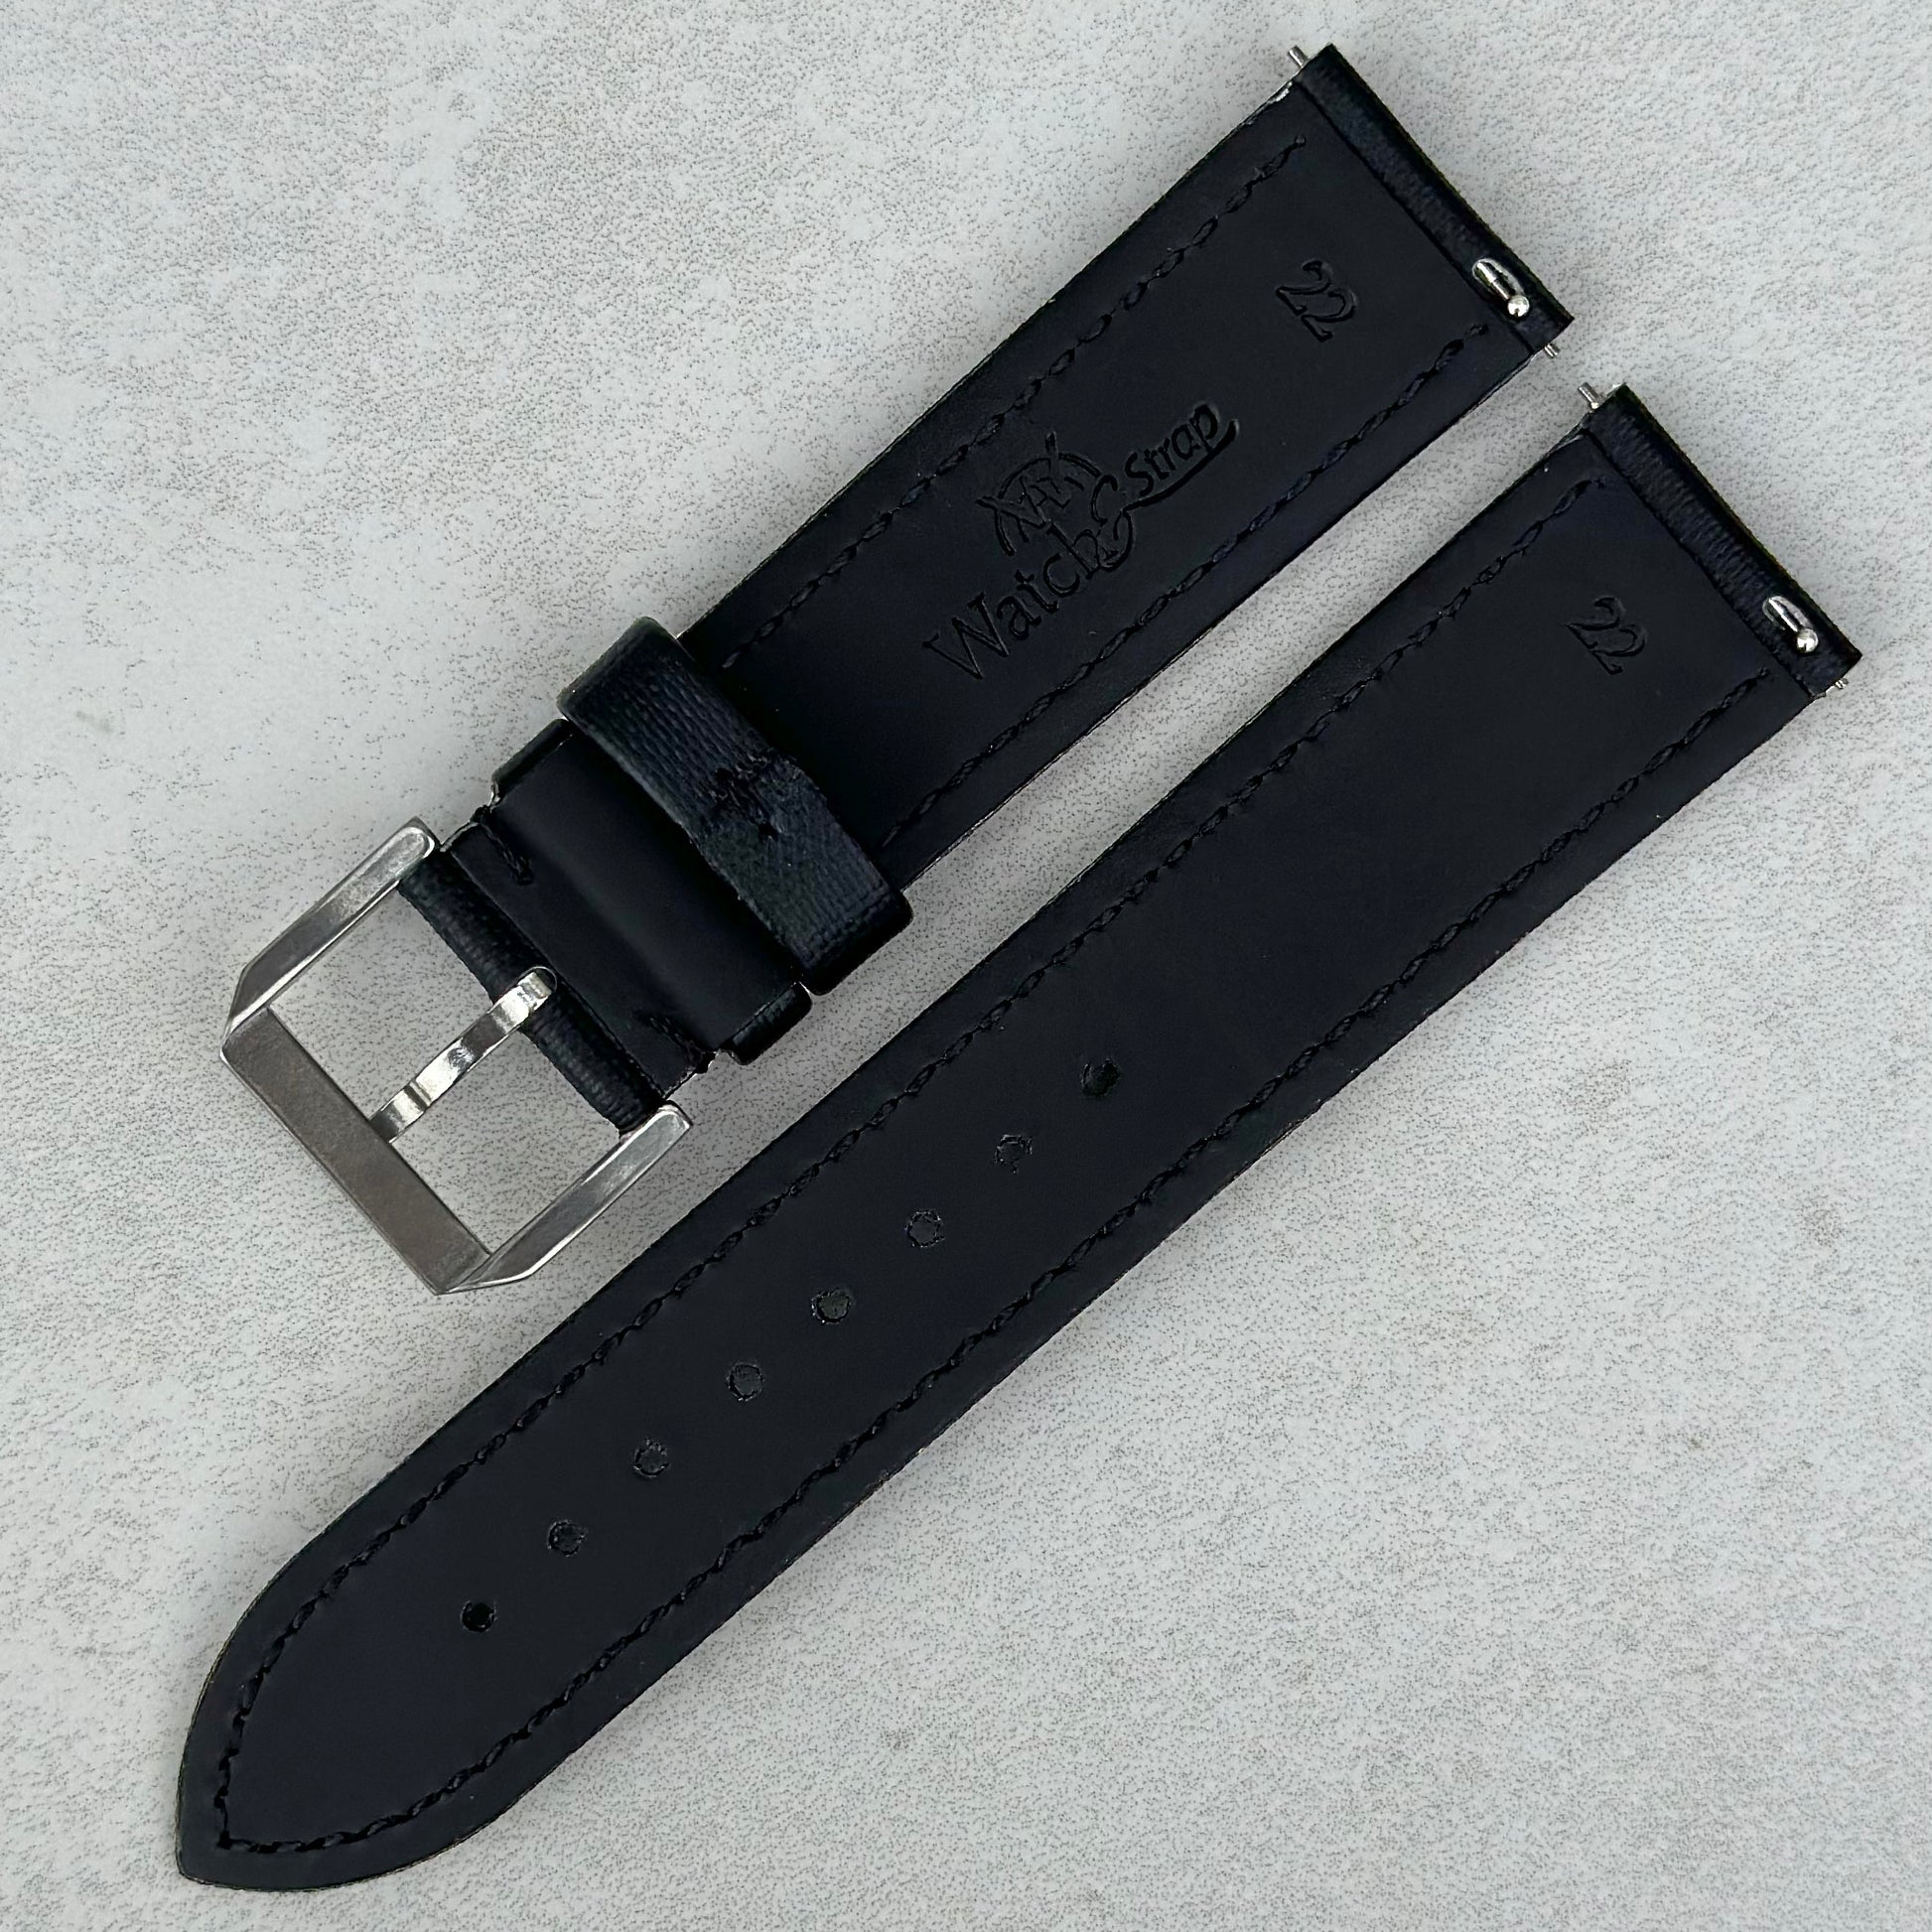 Rear of the Bermuda jet black sail cloth watch strap. Quick release pins. Watch And Strap.